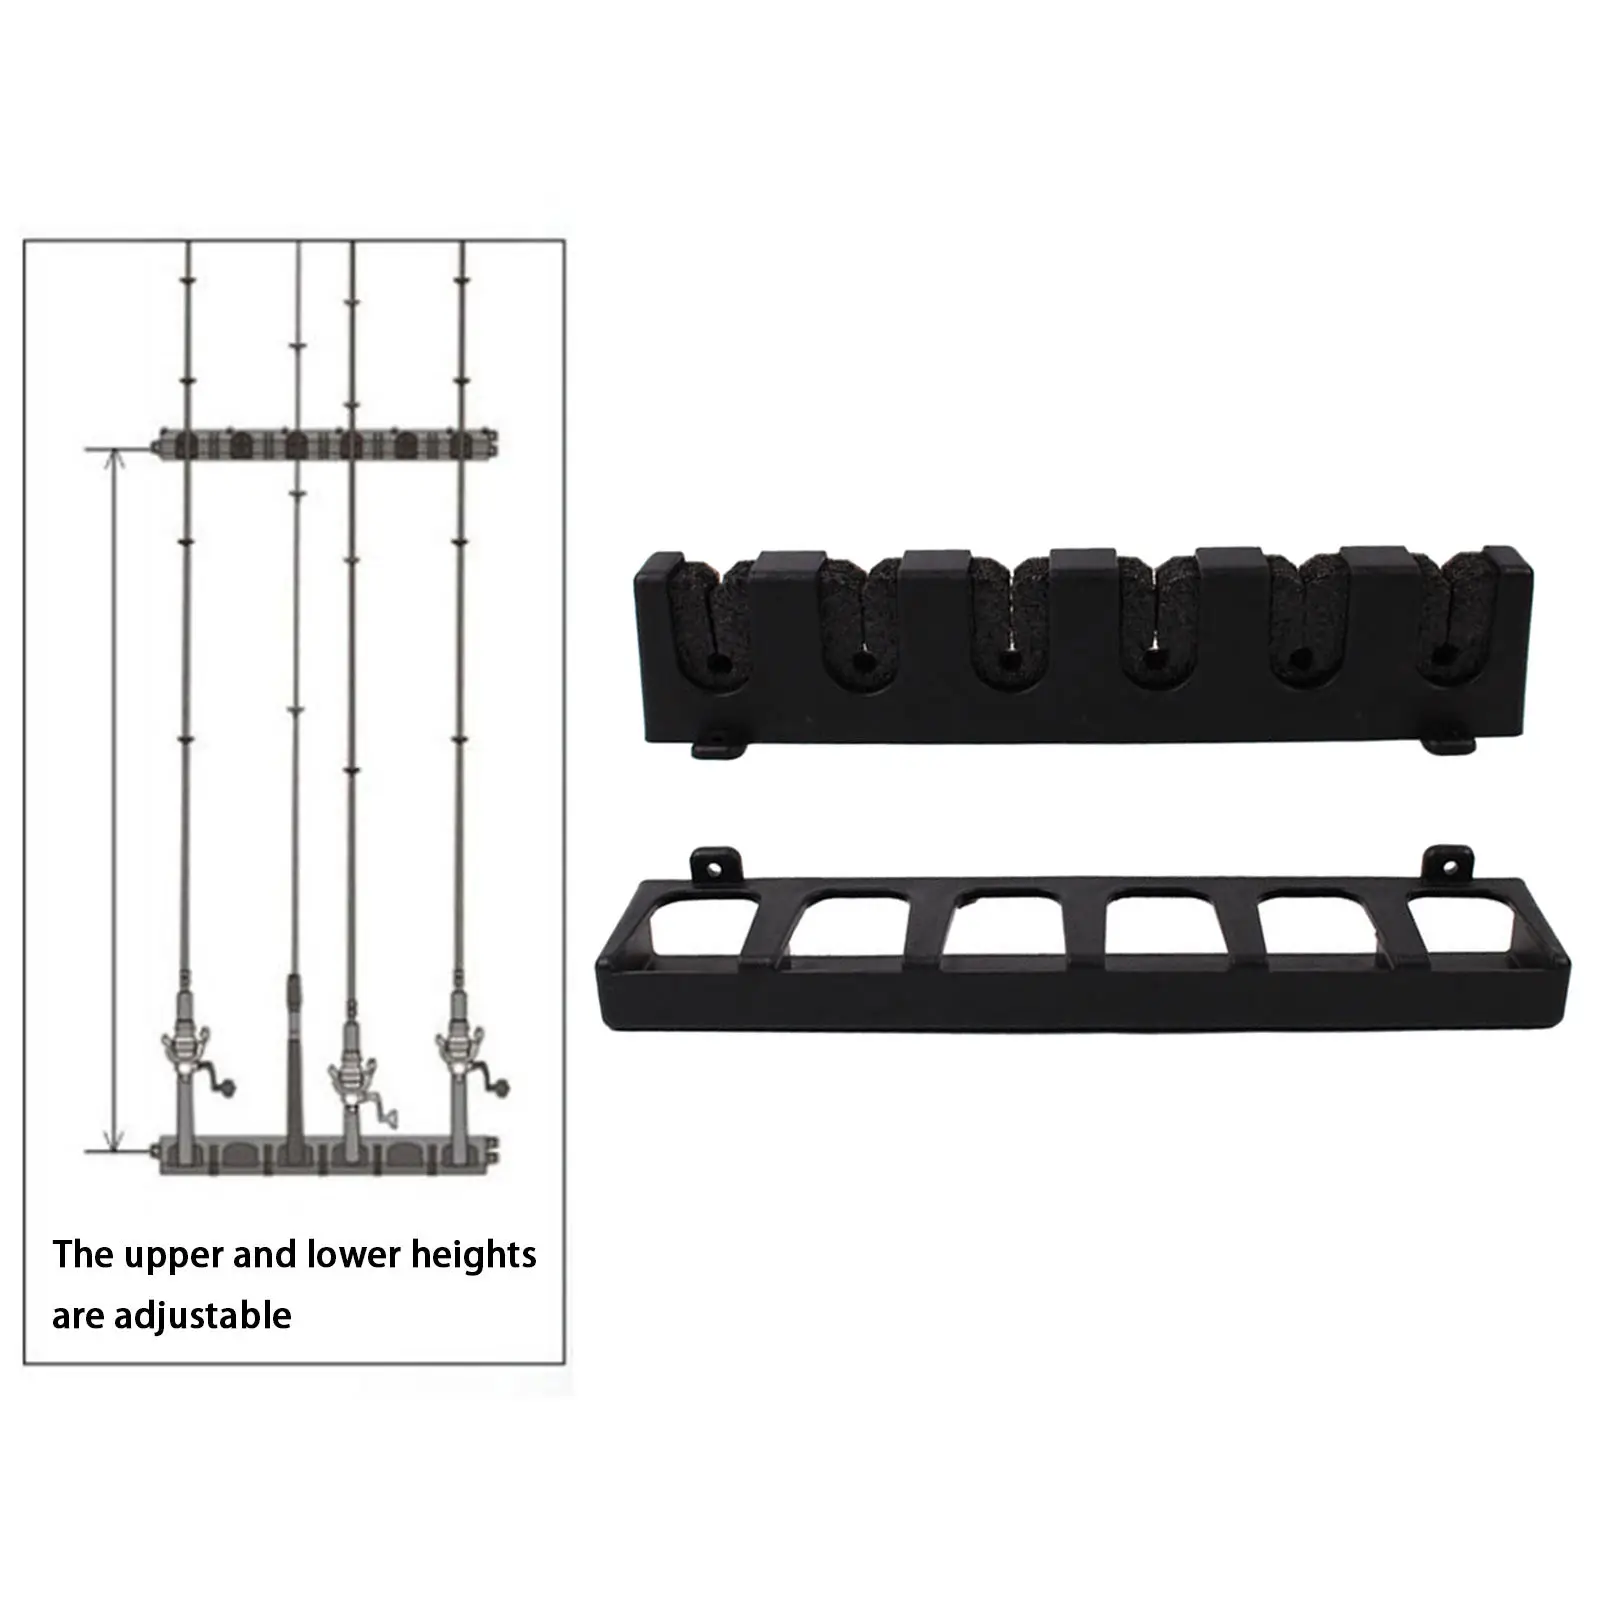 Steady Fishing Pole Racks Organizer Horizontal Vertical Support Holder Wall Mount Fishing Rod Holders for Garage All Types Rod